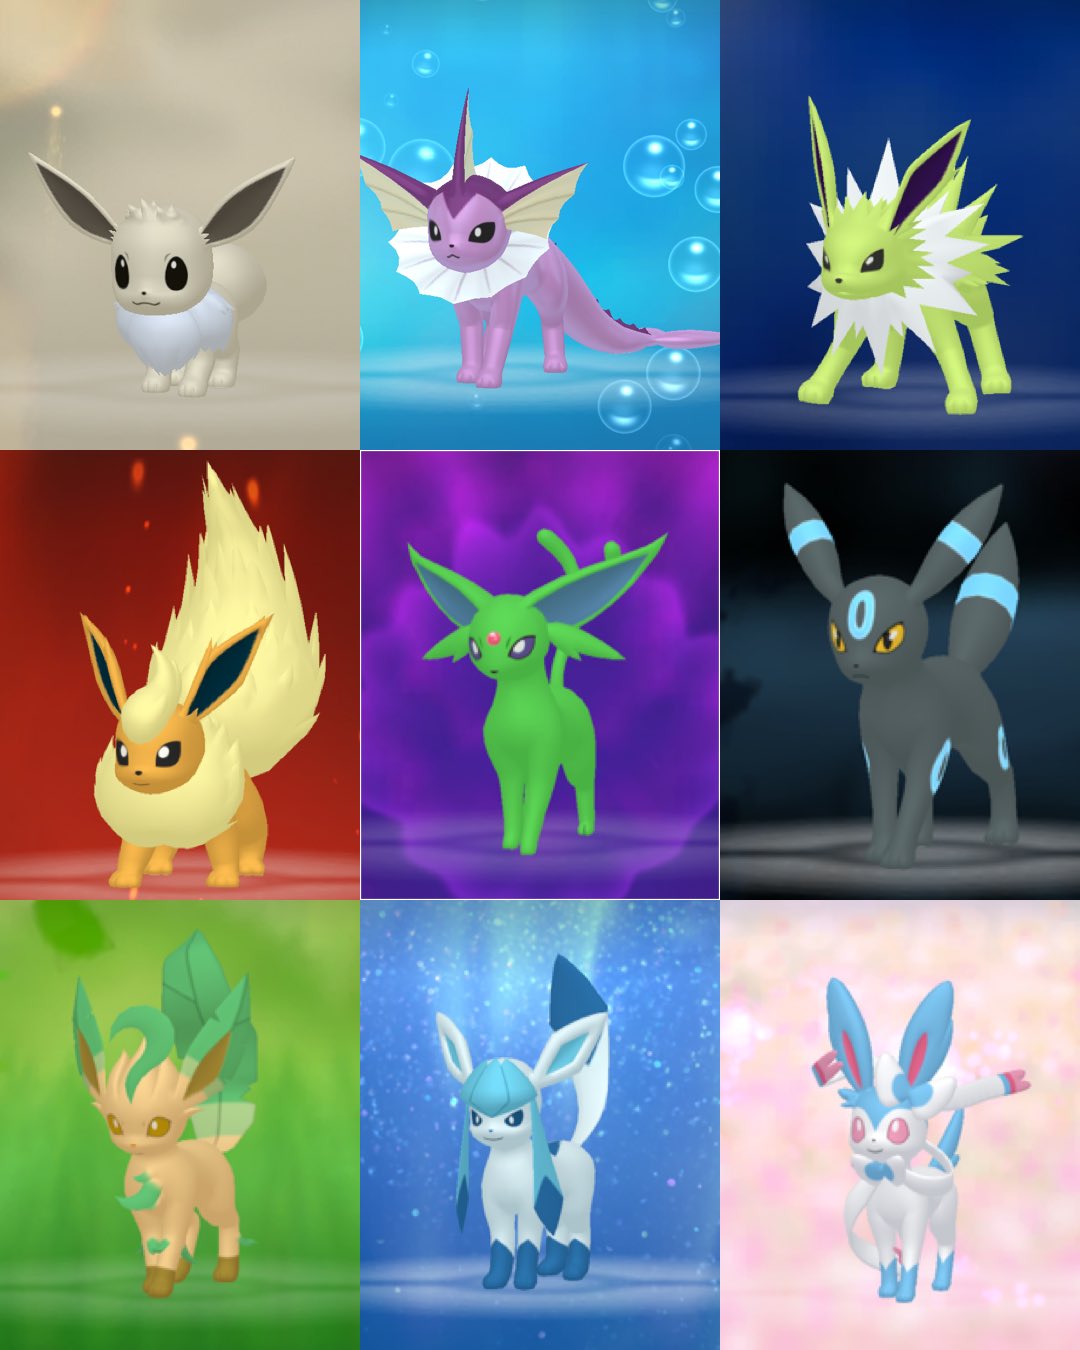 Brian Yates on X: I finally have a full set of Shiny Eeveelutions in  Pokémon Home! With a little help with the Community Days in Pokémon Go  #Pokemon #Eeveelutions #Shiny #ShinyPokemon #PokemonHome #